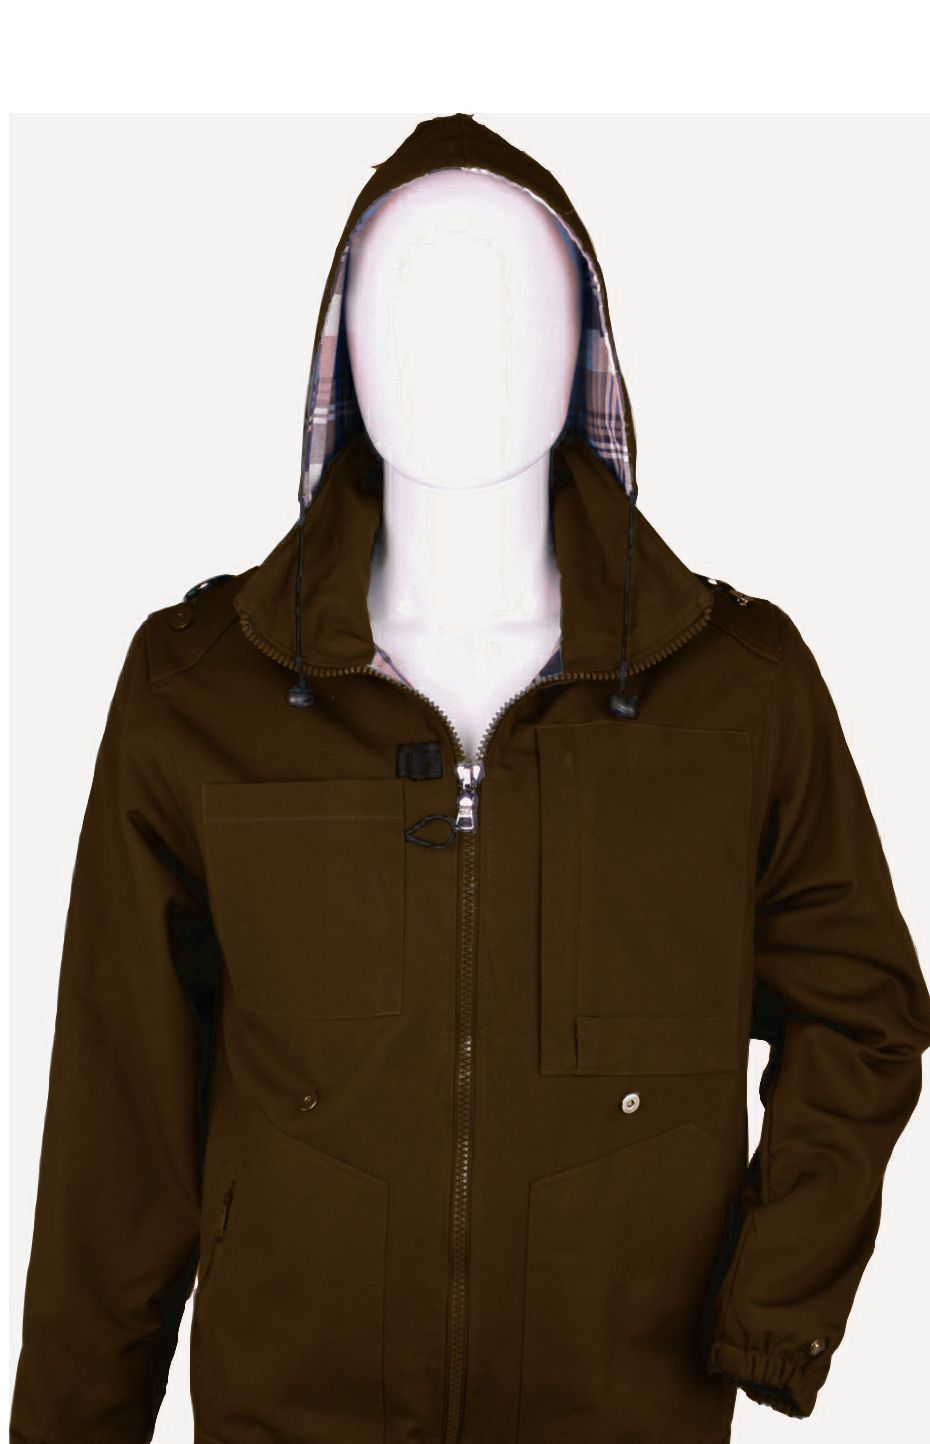 TS Impact Travel Jacket convertible into a Bag, with concealed pockets.  Hoodie